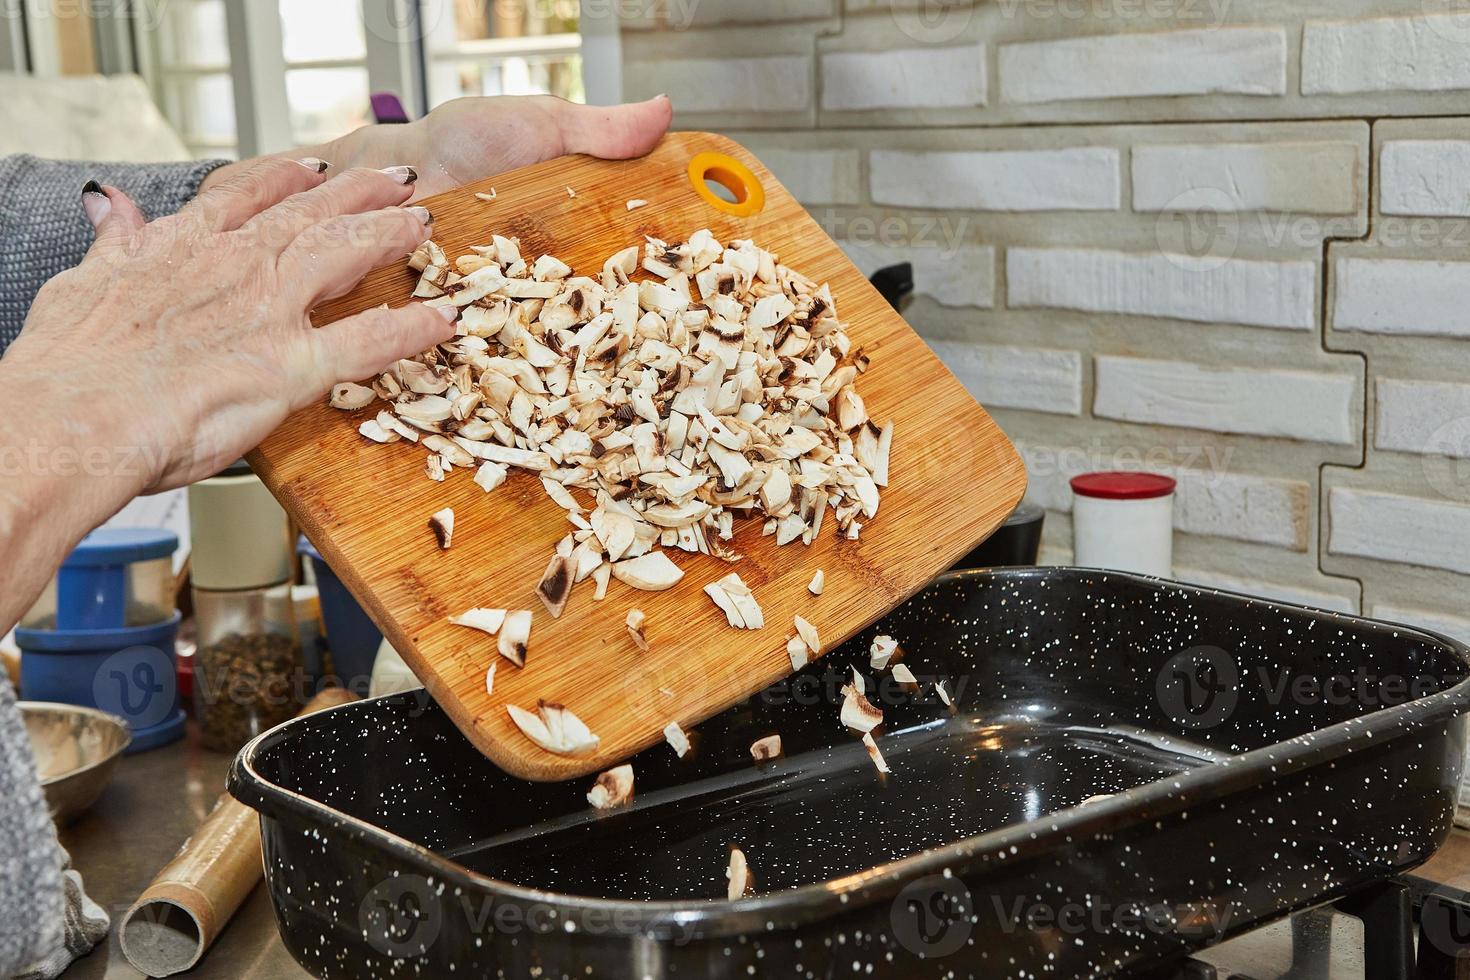 Cook throws mushrooms into square frying pan photo